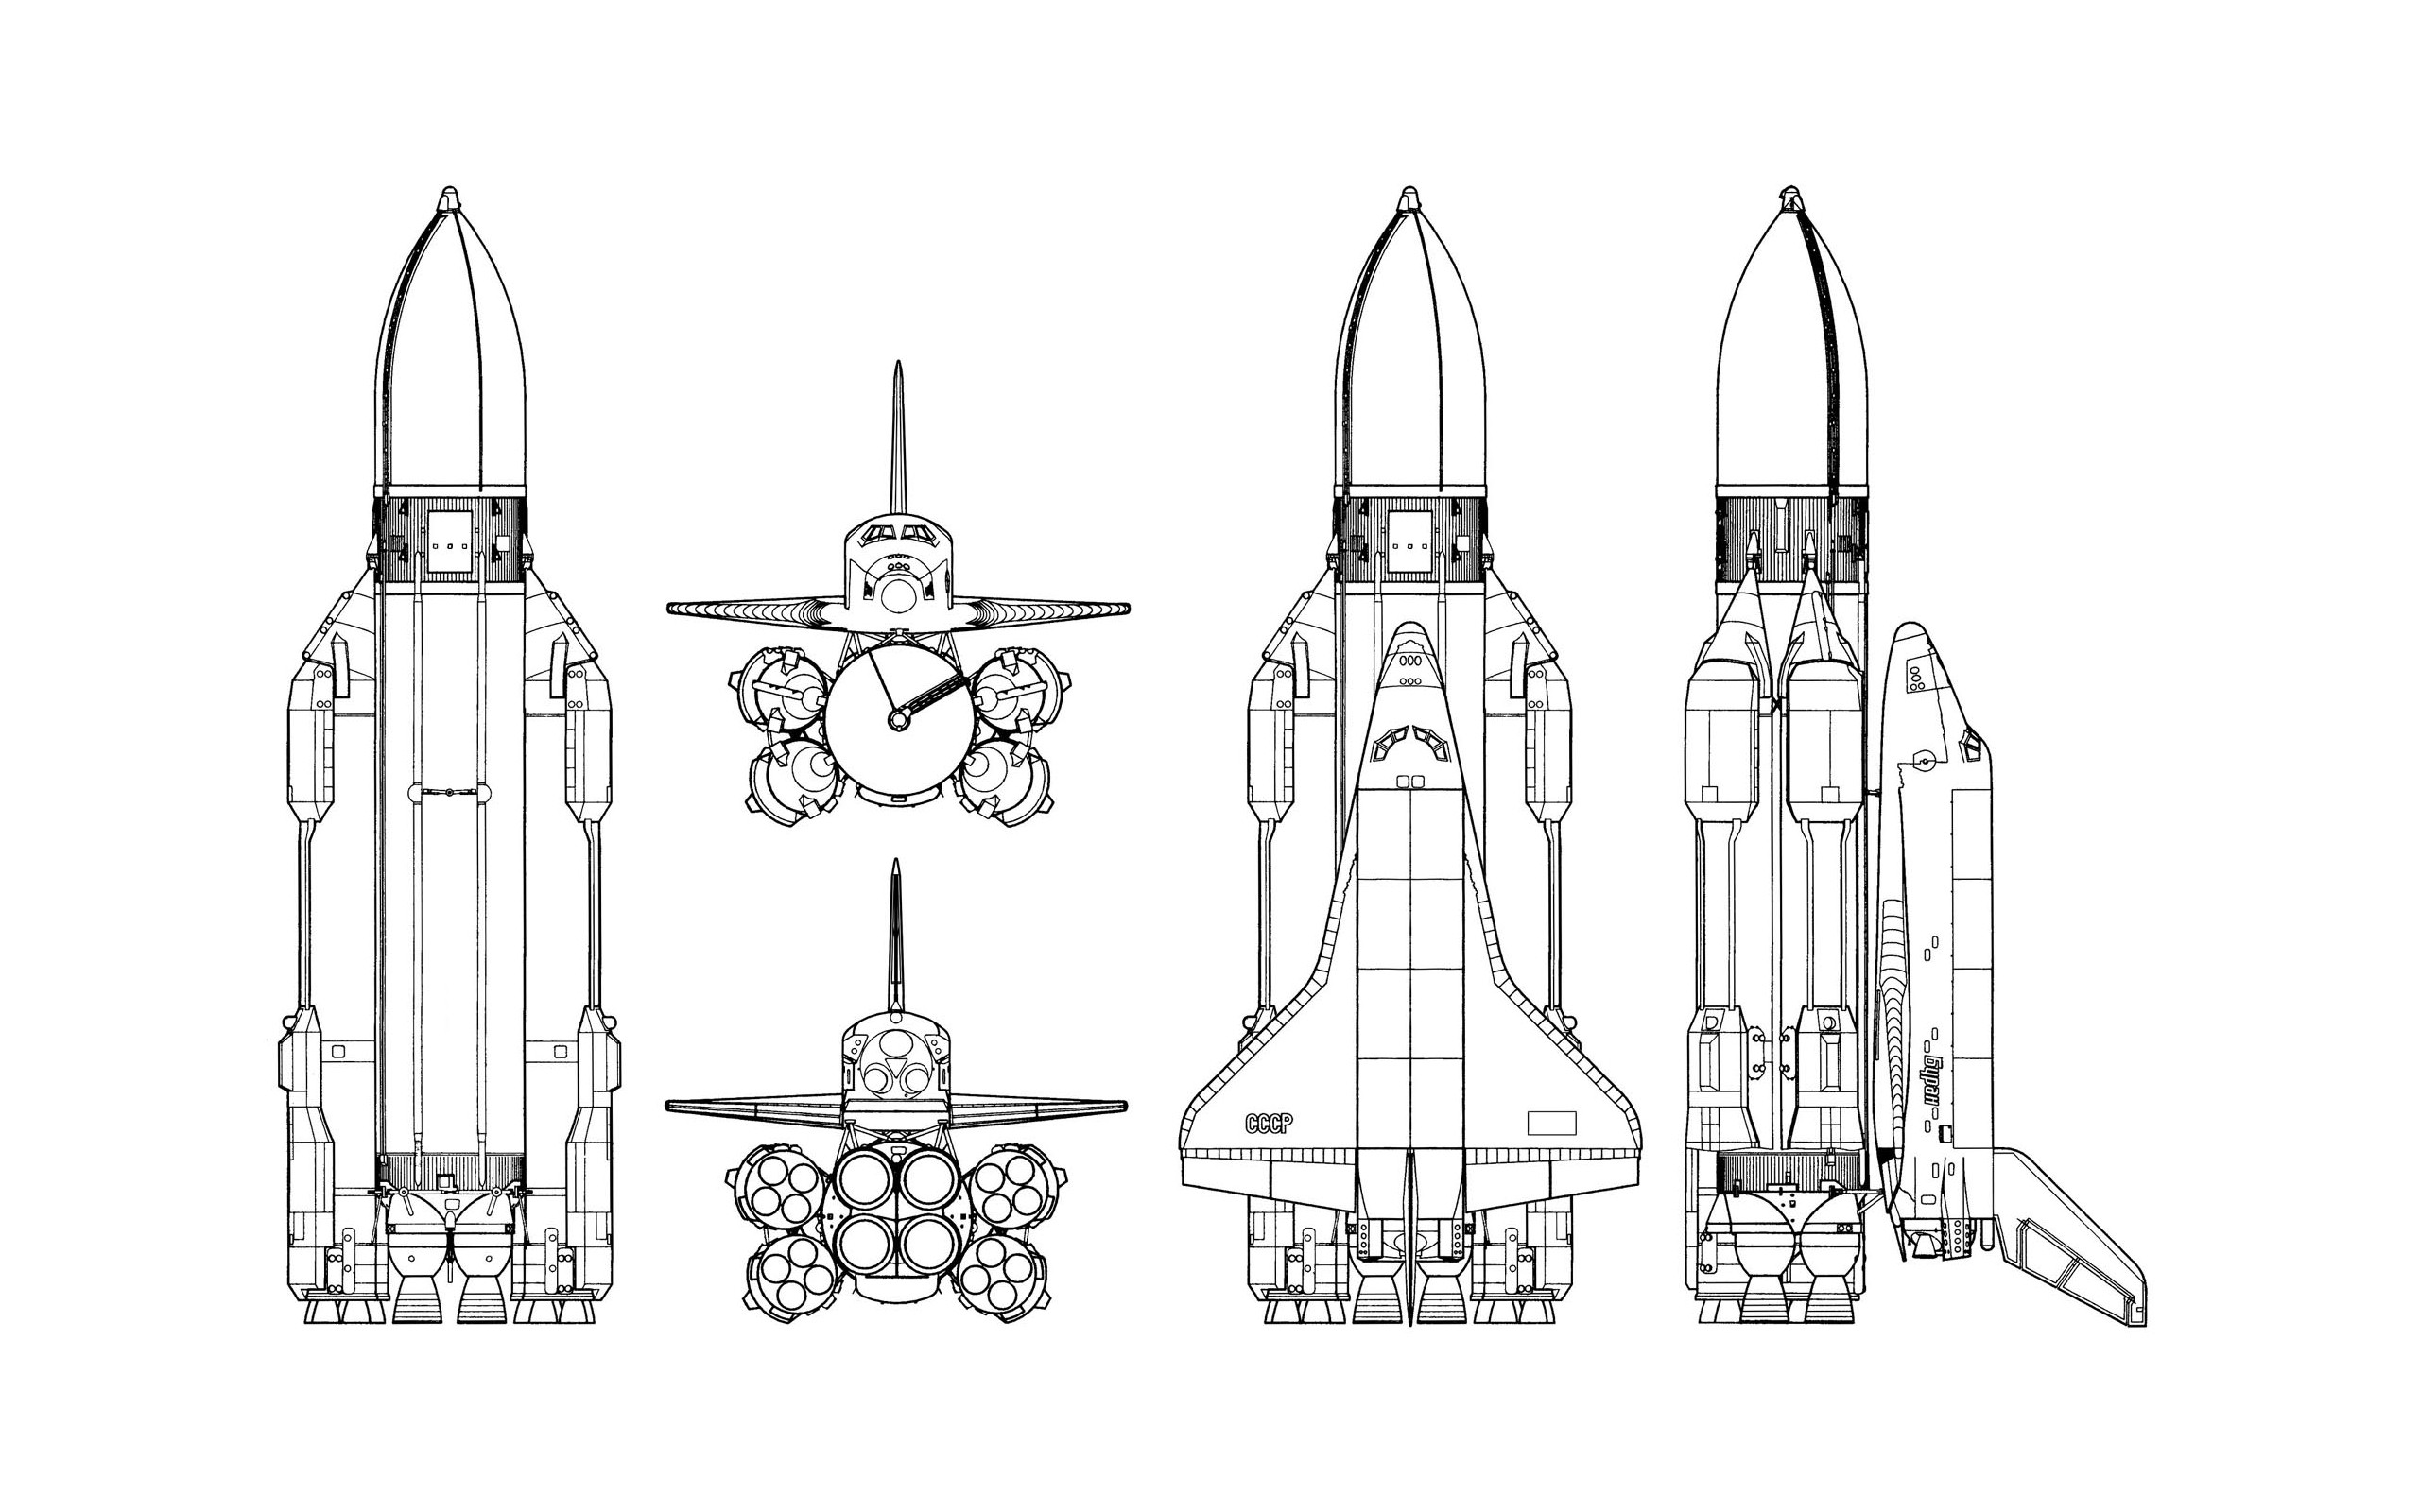 Space Shuttle USSR Rocket Simple Background Schematic Buran Energia 2560x1600